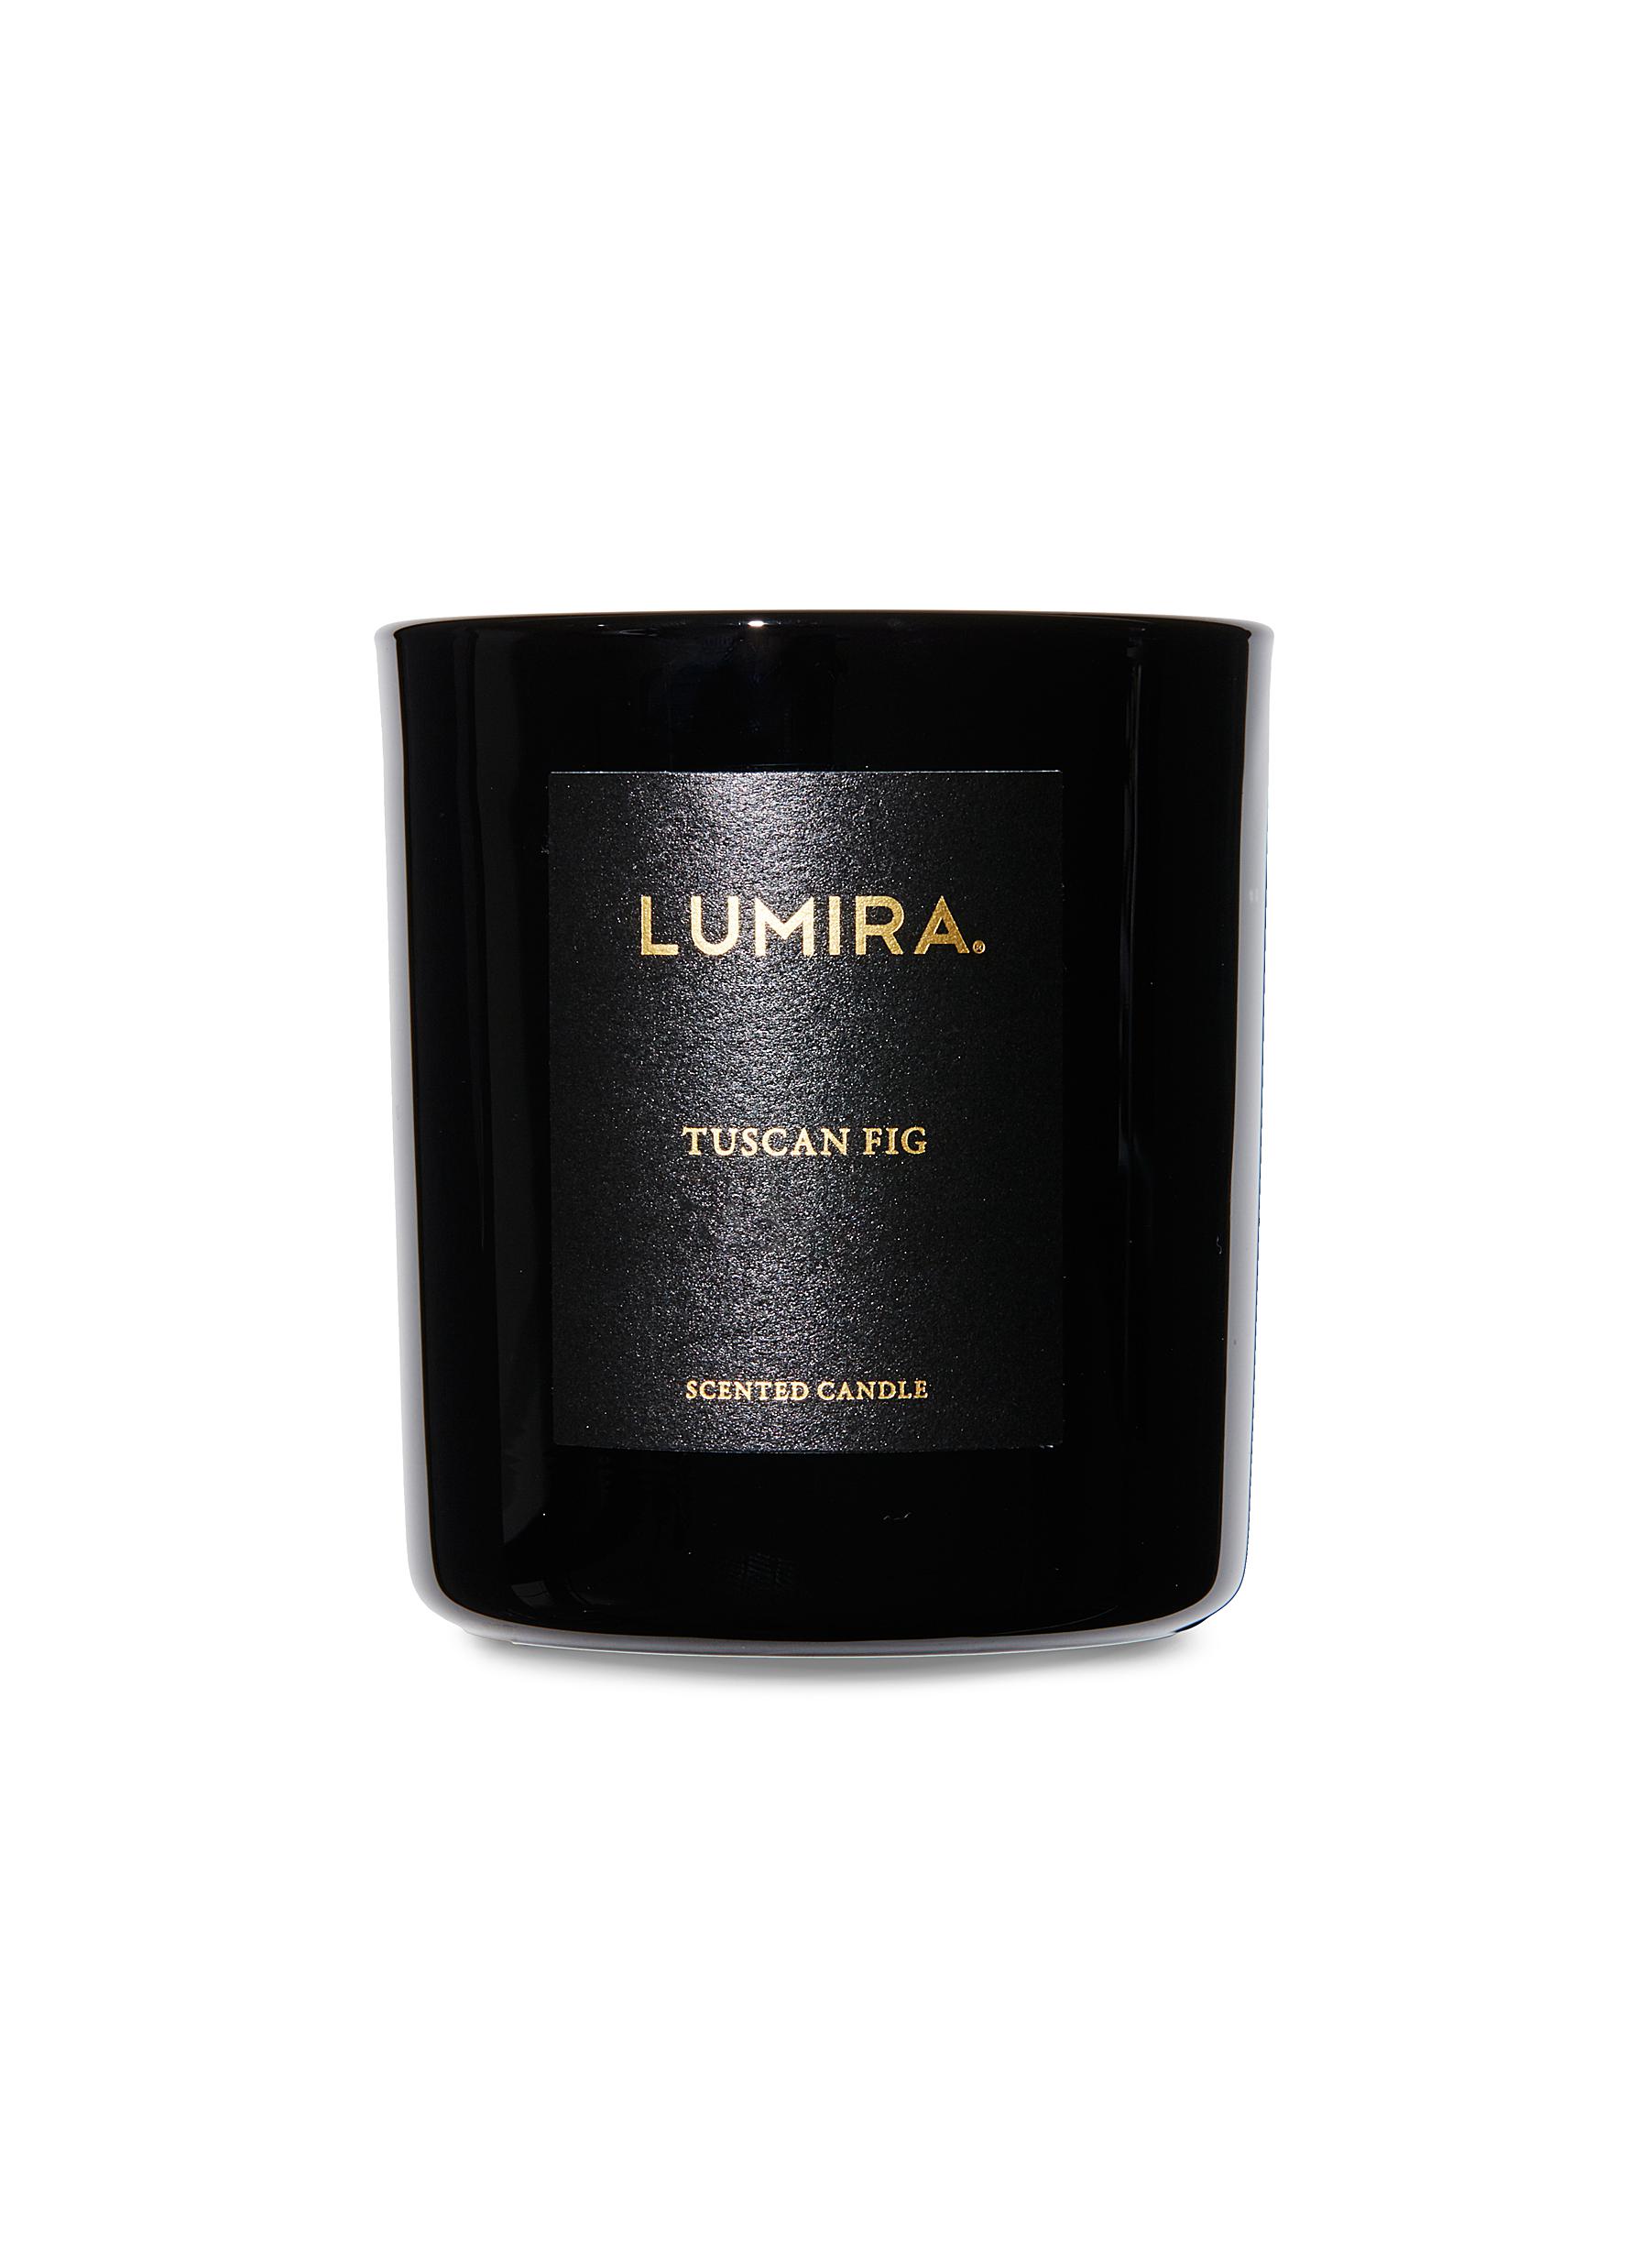 Tuscan Fig Scented Candle - 300g